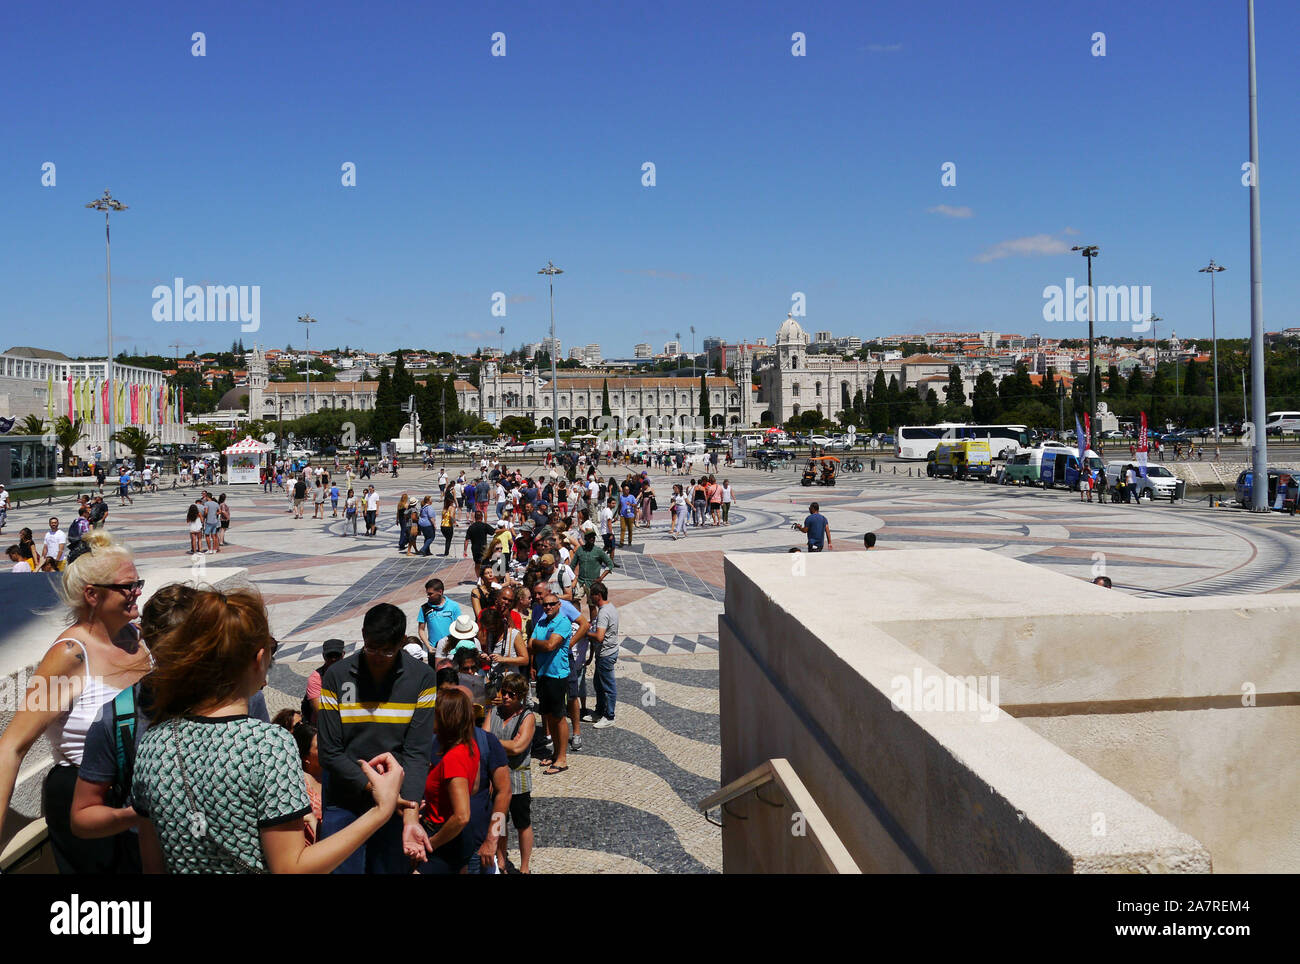 Portugal; Lisbon. District of Santa Maria de Belem. Tourists queueing to visit the Monument to the Discoveries (Monumento dos Descobrimentos). In the Stock Photo